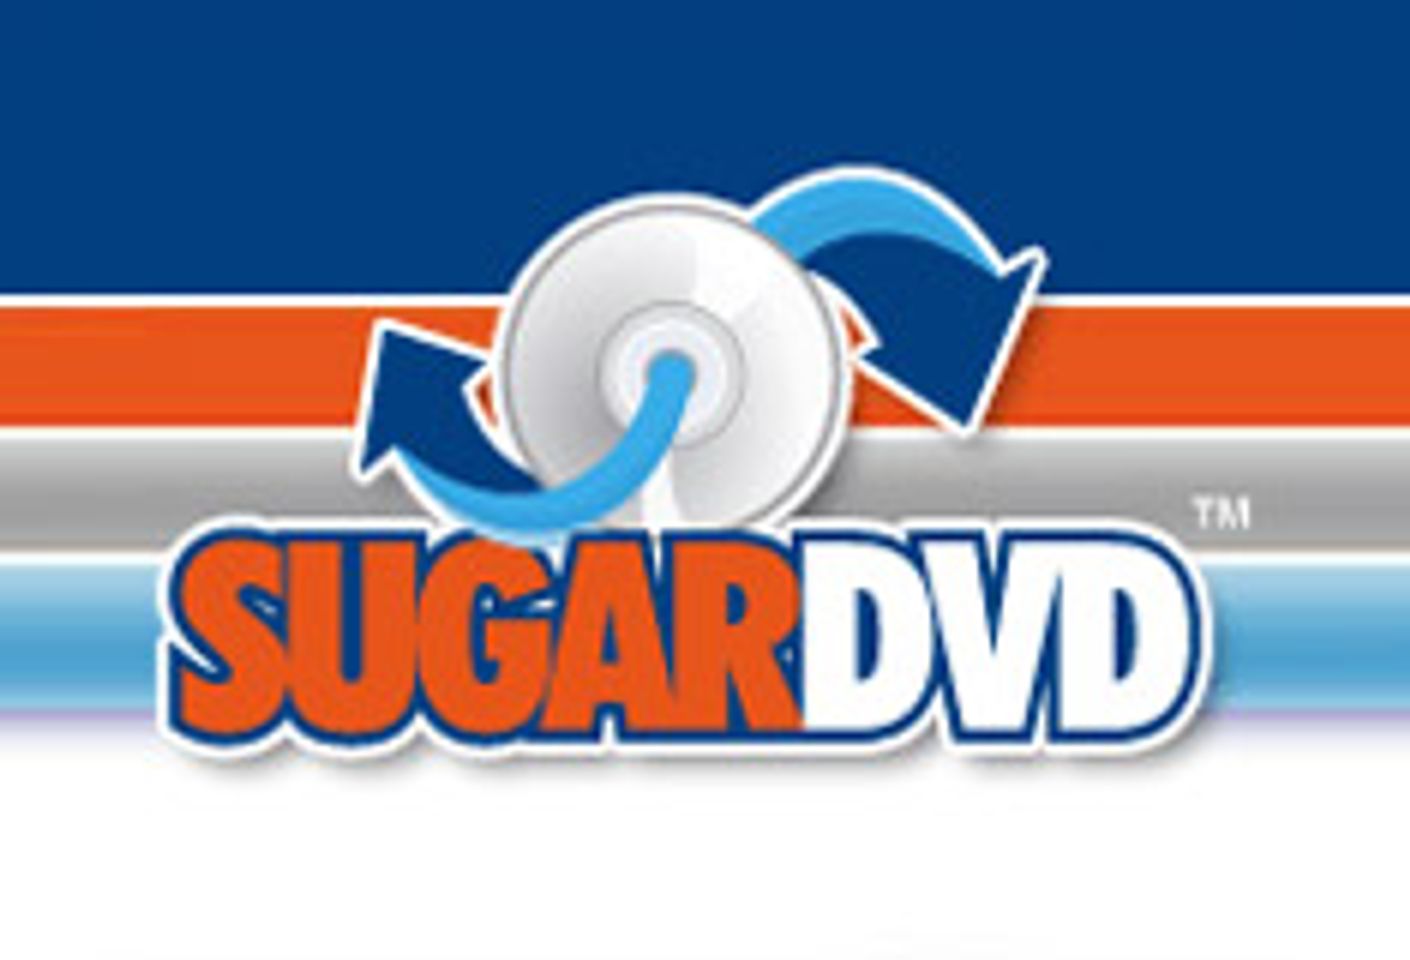 SugarDVD Offers Fans Date With a Porn Star